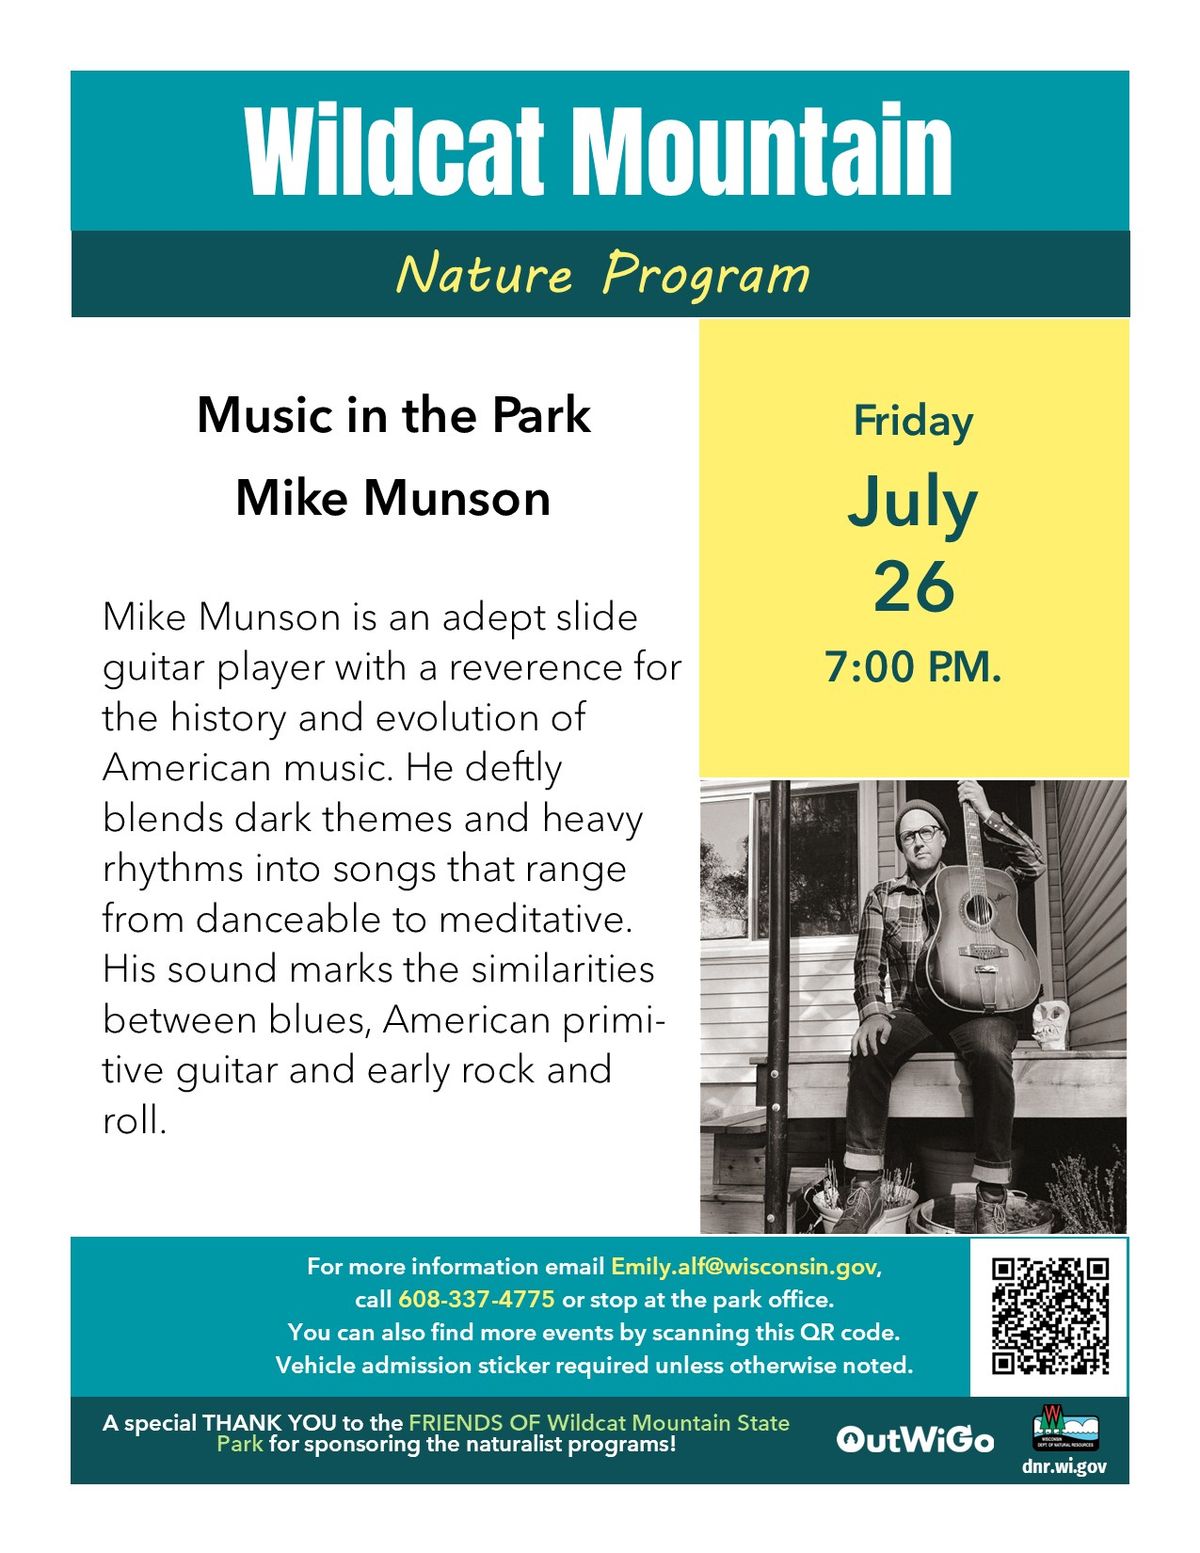 Music in the Park - Mike Munson